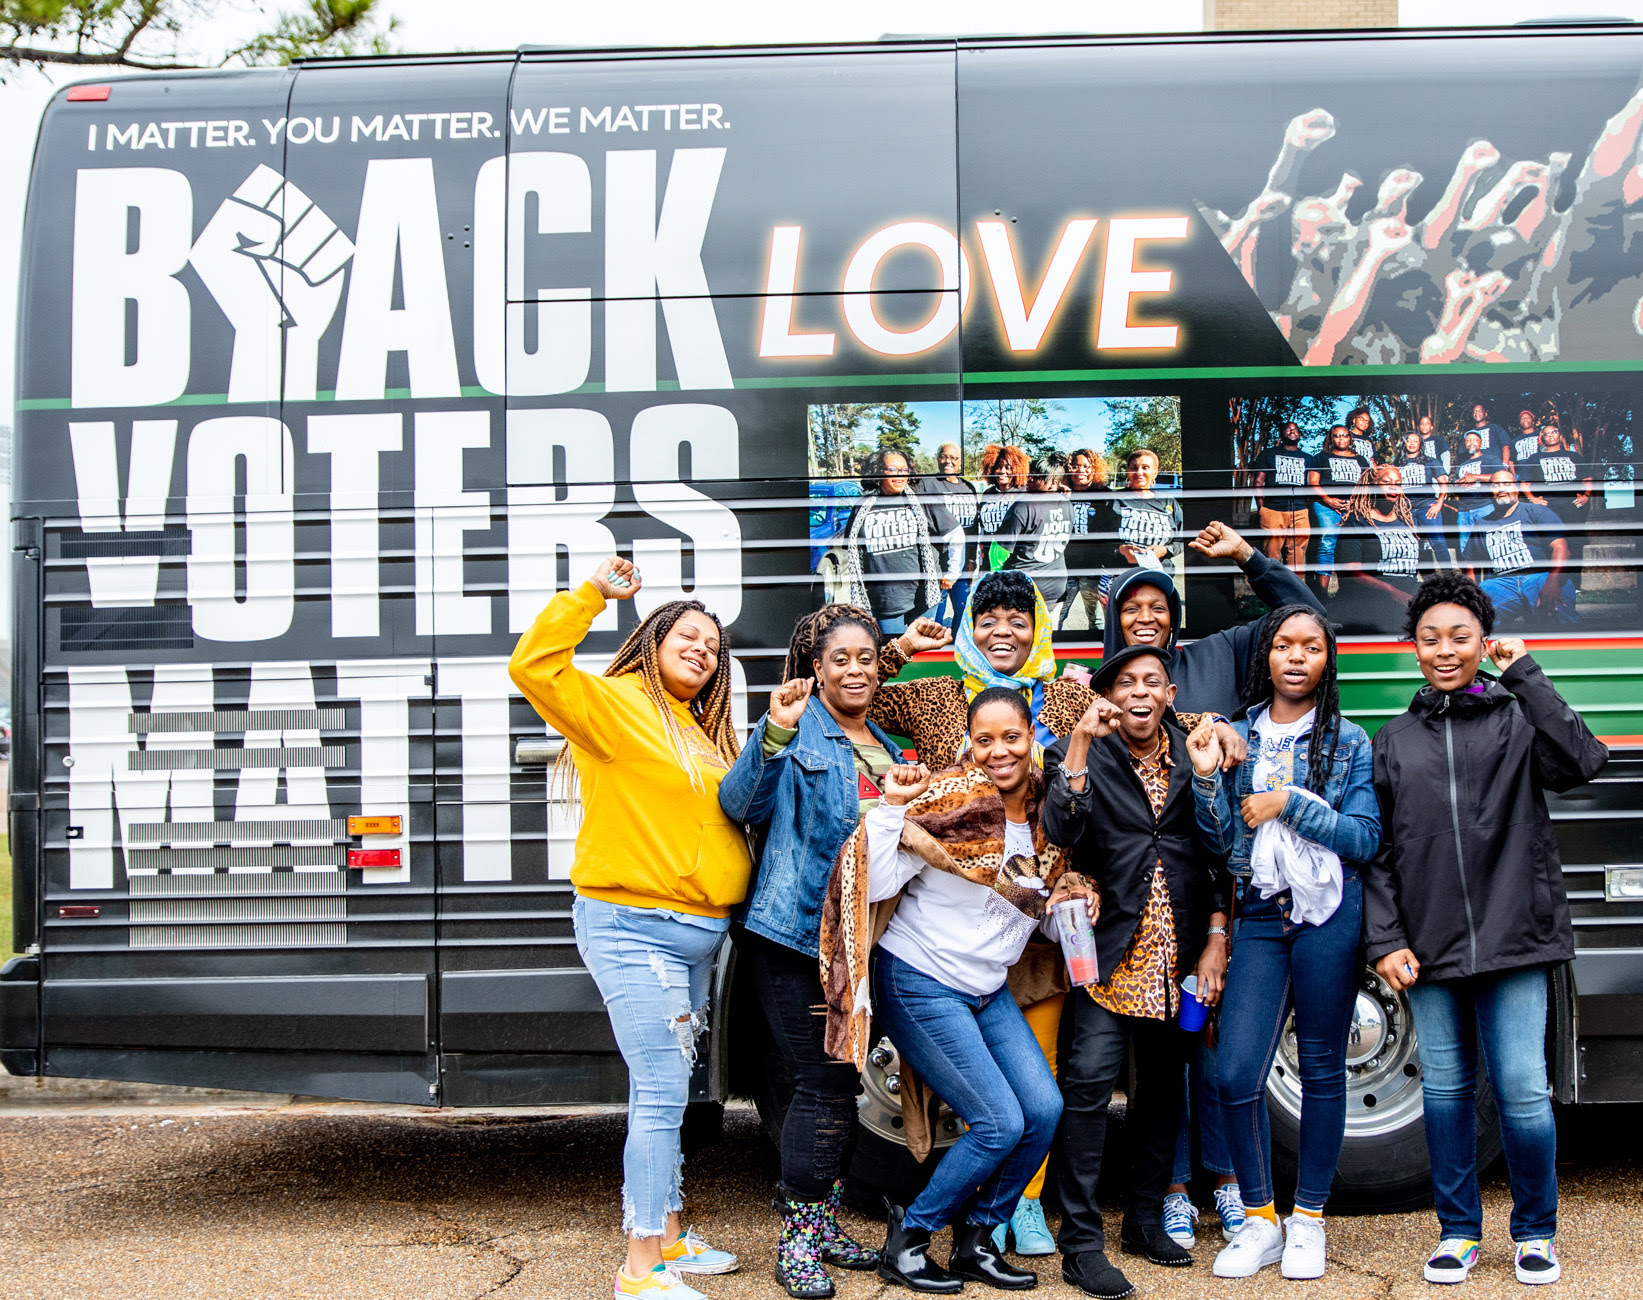 Black Voters Matter uses buses in its community organizing events